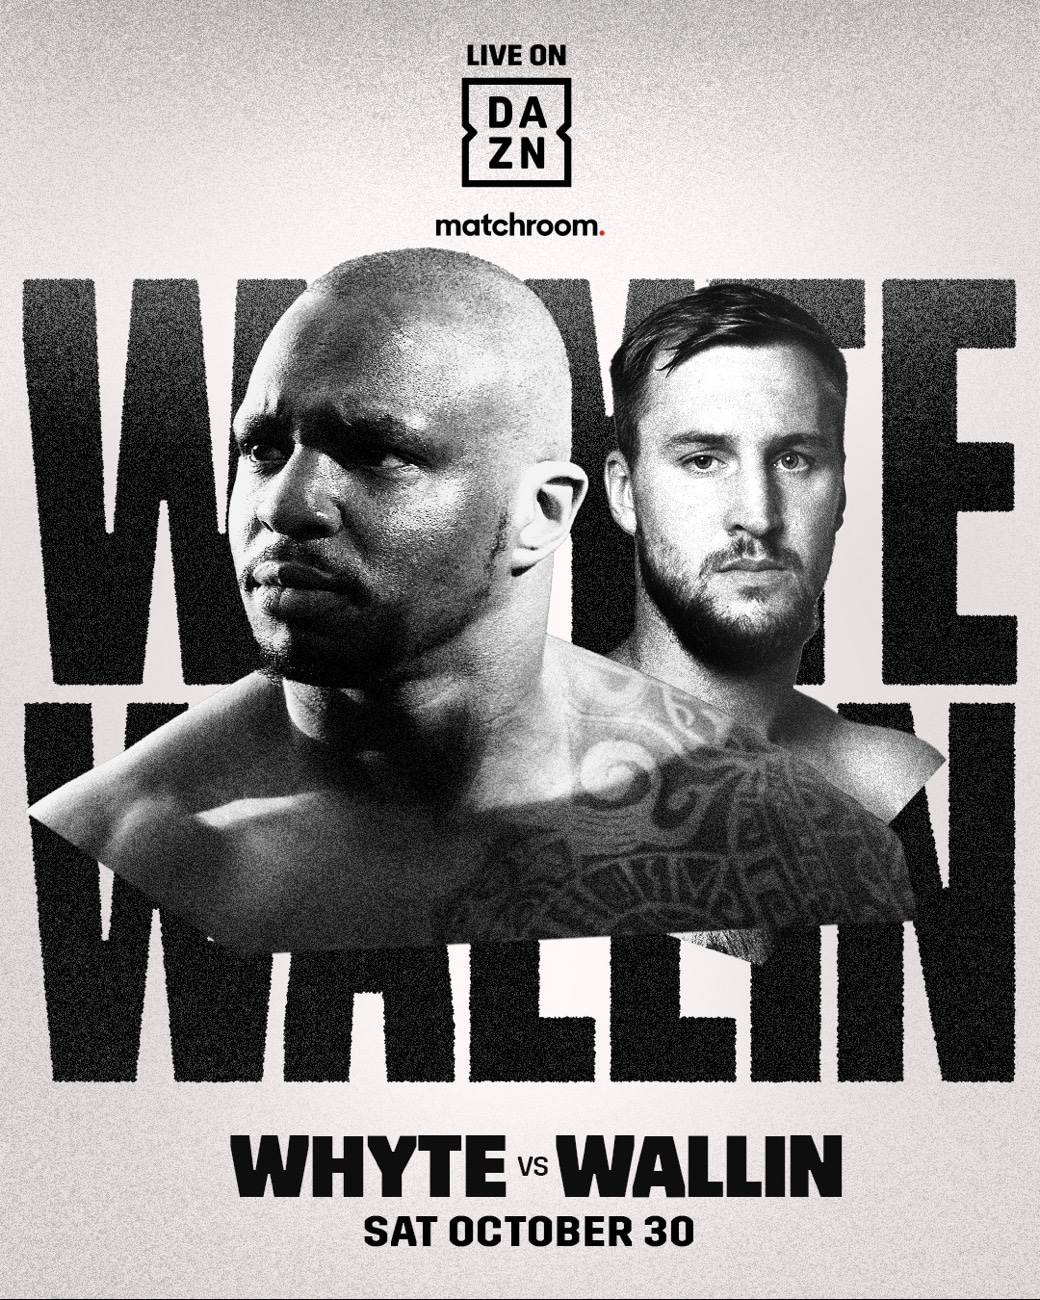 Dillian Whyte boxing photo and news image